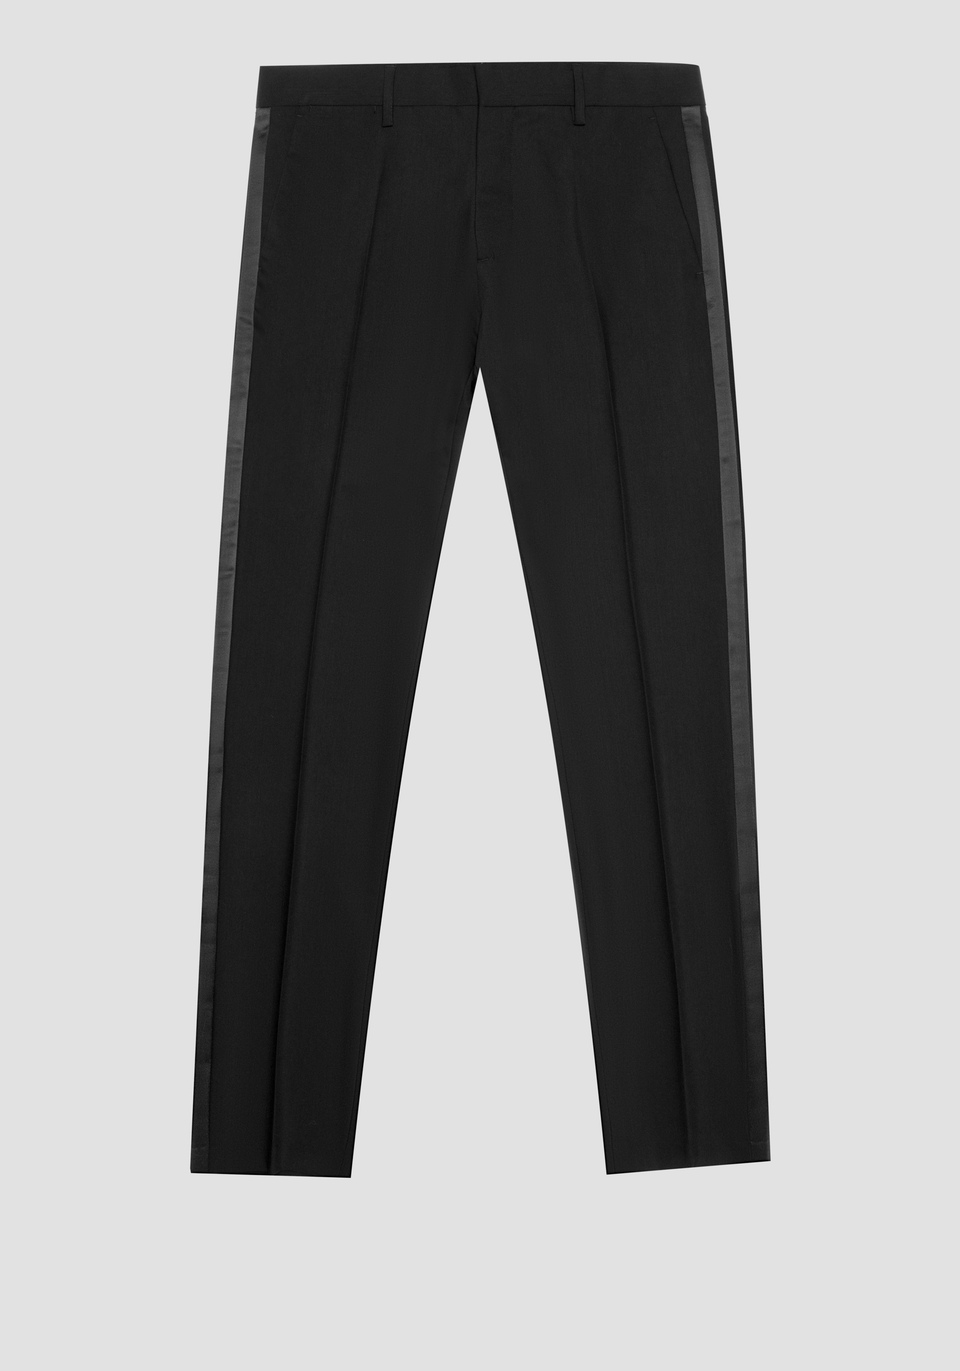 "NINA" SLIM FIT TROUSERS IN STRETCH VISCOSE BLEND WITH SATIN DETAILS - Antony Morato Online Shop